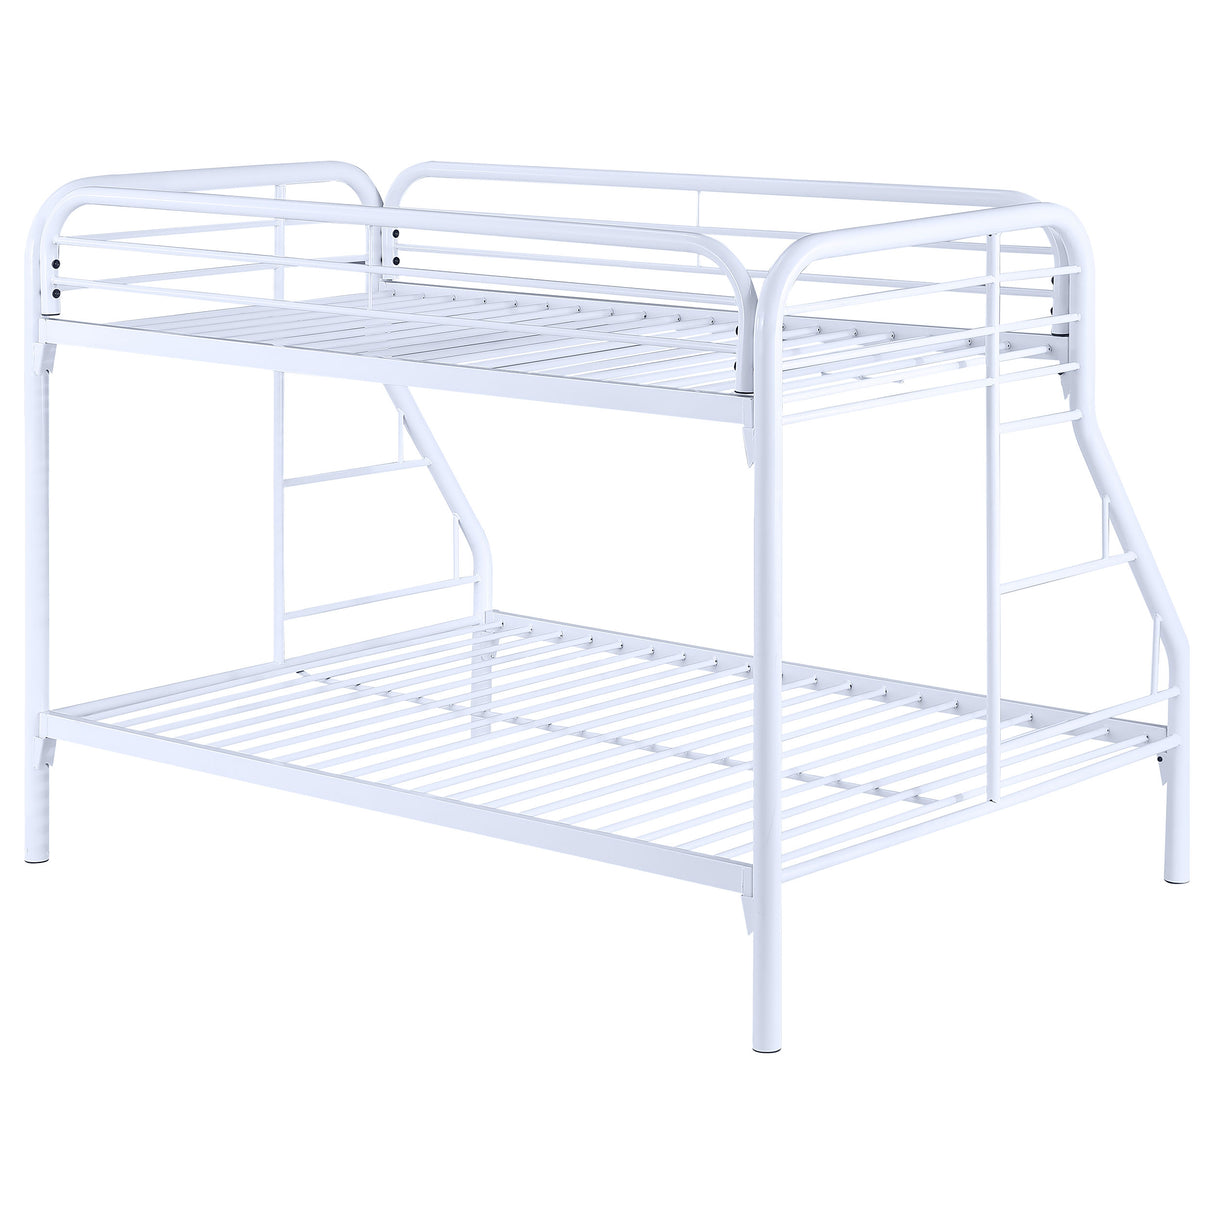 Twin / Full Bunk Bed - Morgan Twin Over Full Bunk Bed White